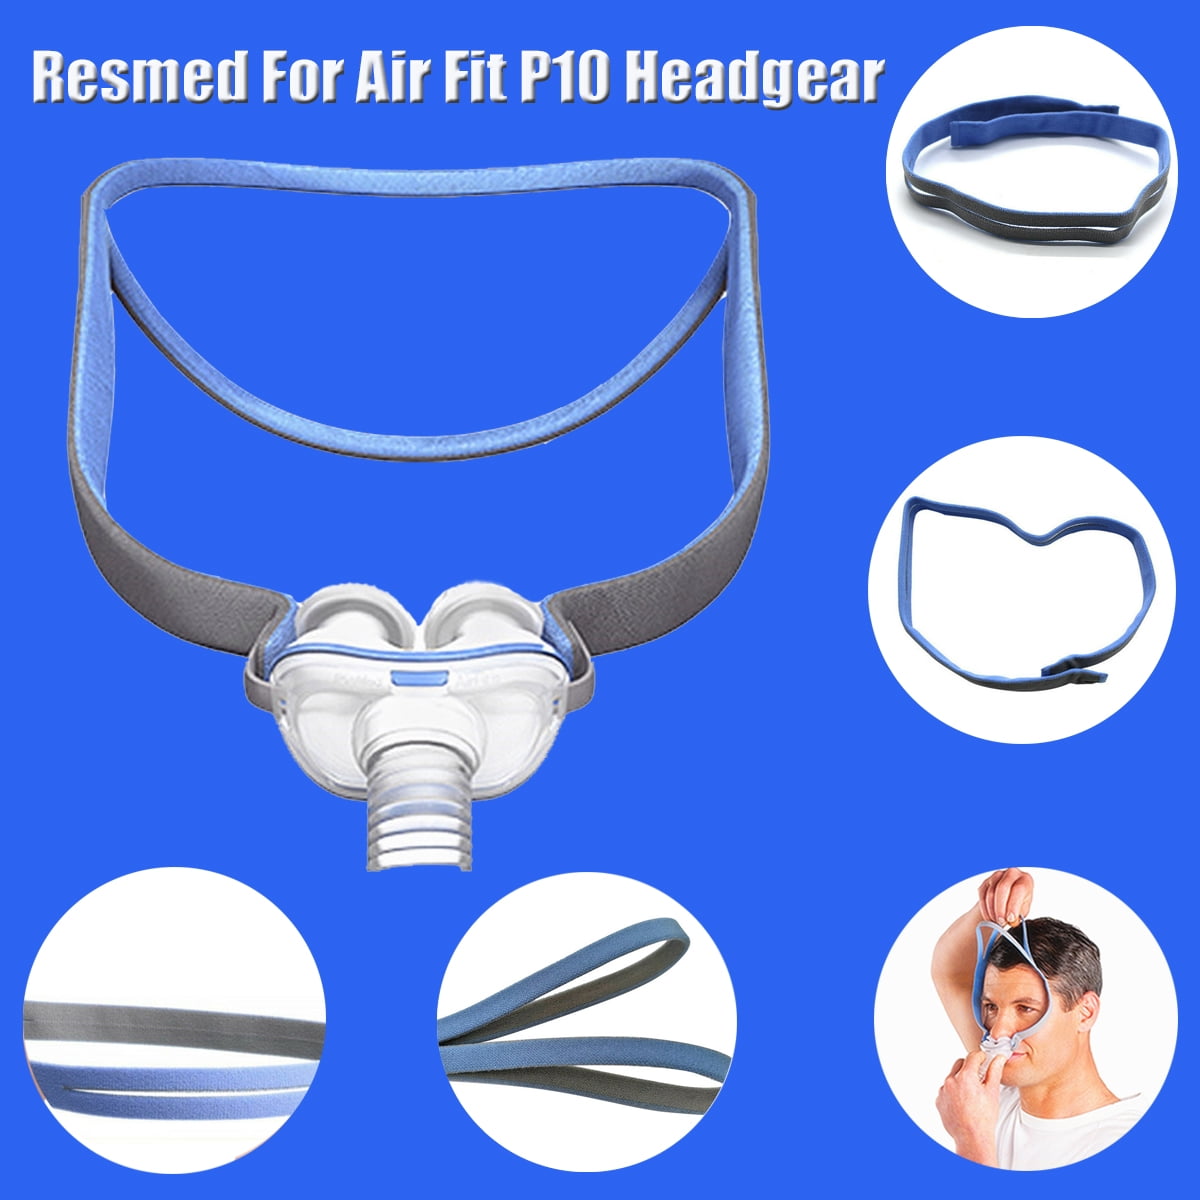 resmed airfit p10 strap